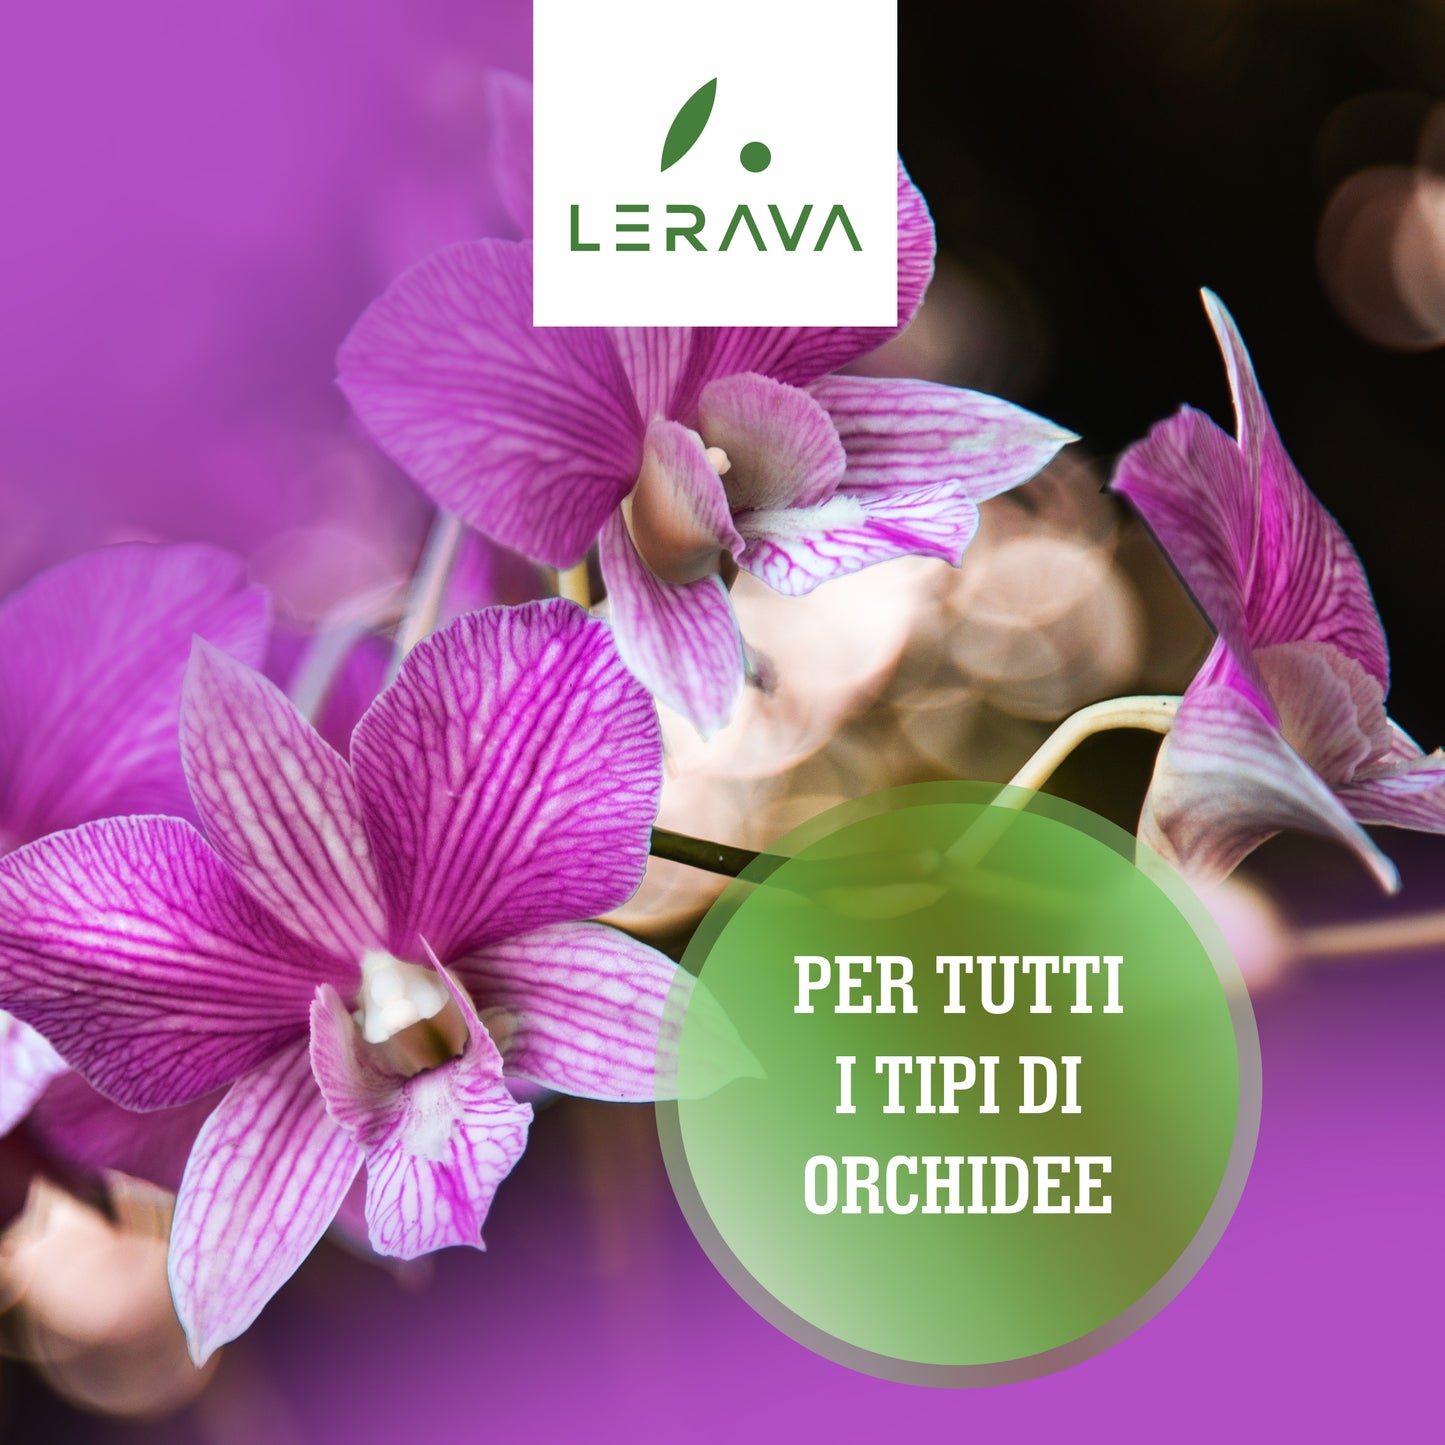 Orchidee - concime per orchidee